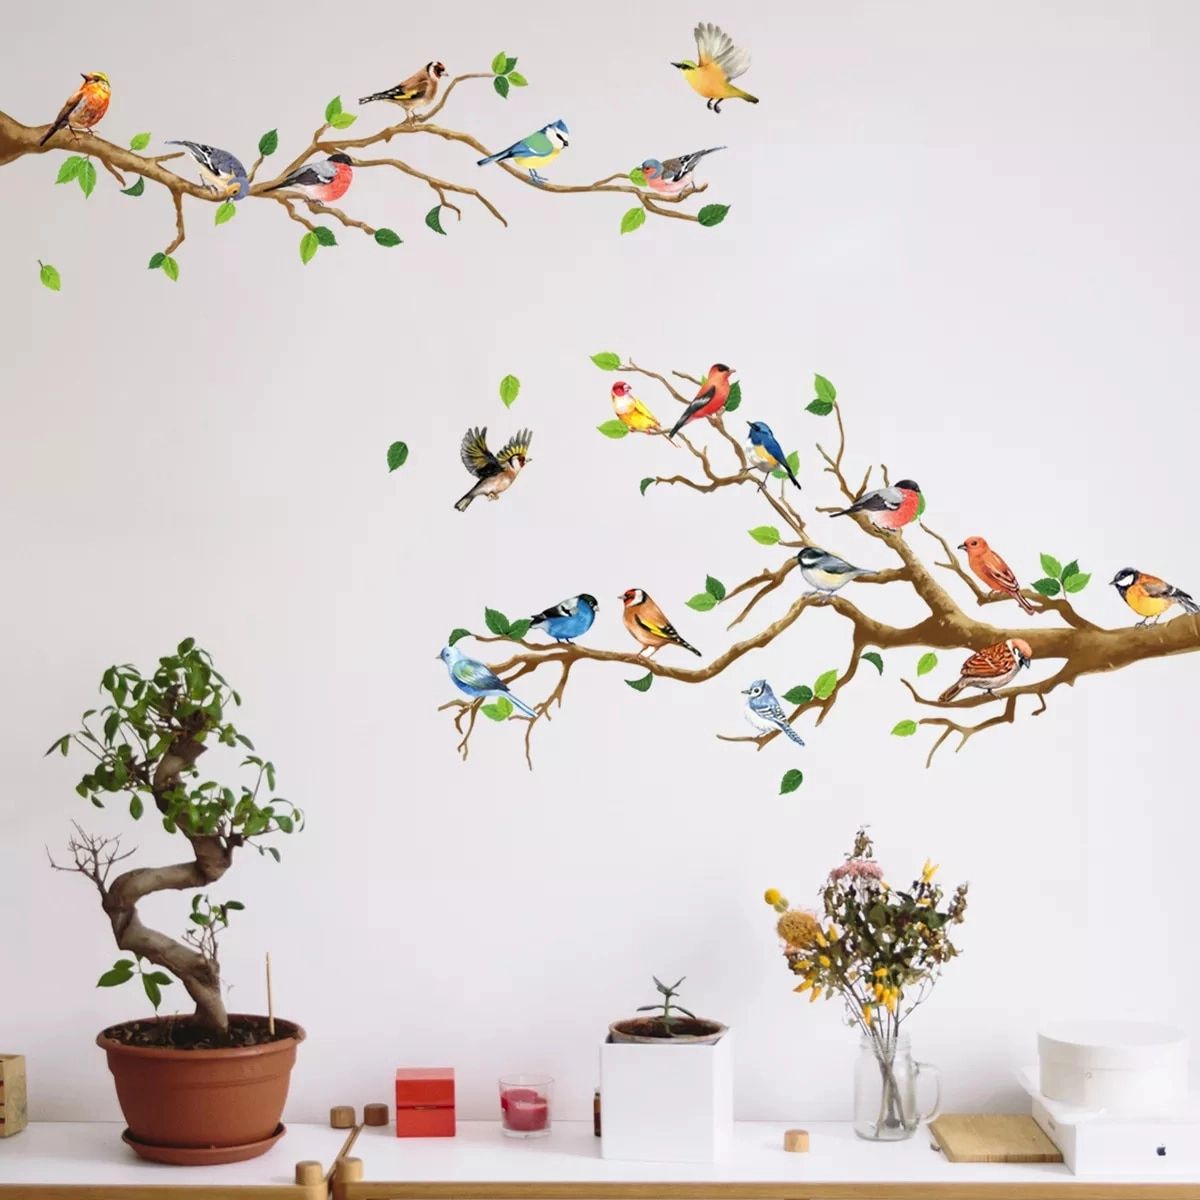 Colored Branches And Birds Wall Stickers For Bedroom Living Room Office  Background Wall Sofa Decorative Wall Art Stickers Pvc – Aliexpress Home &  Garden Within Colorful Branching Wall Art (View 12 of 15)